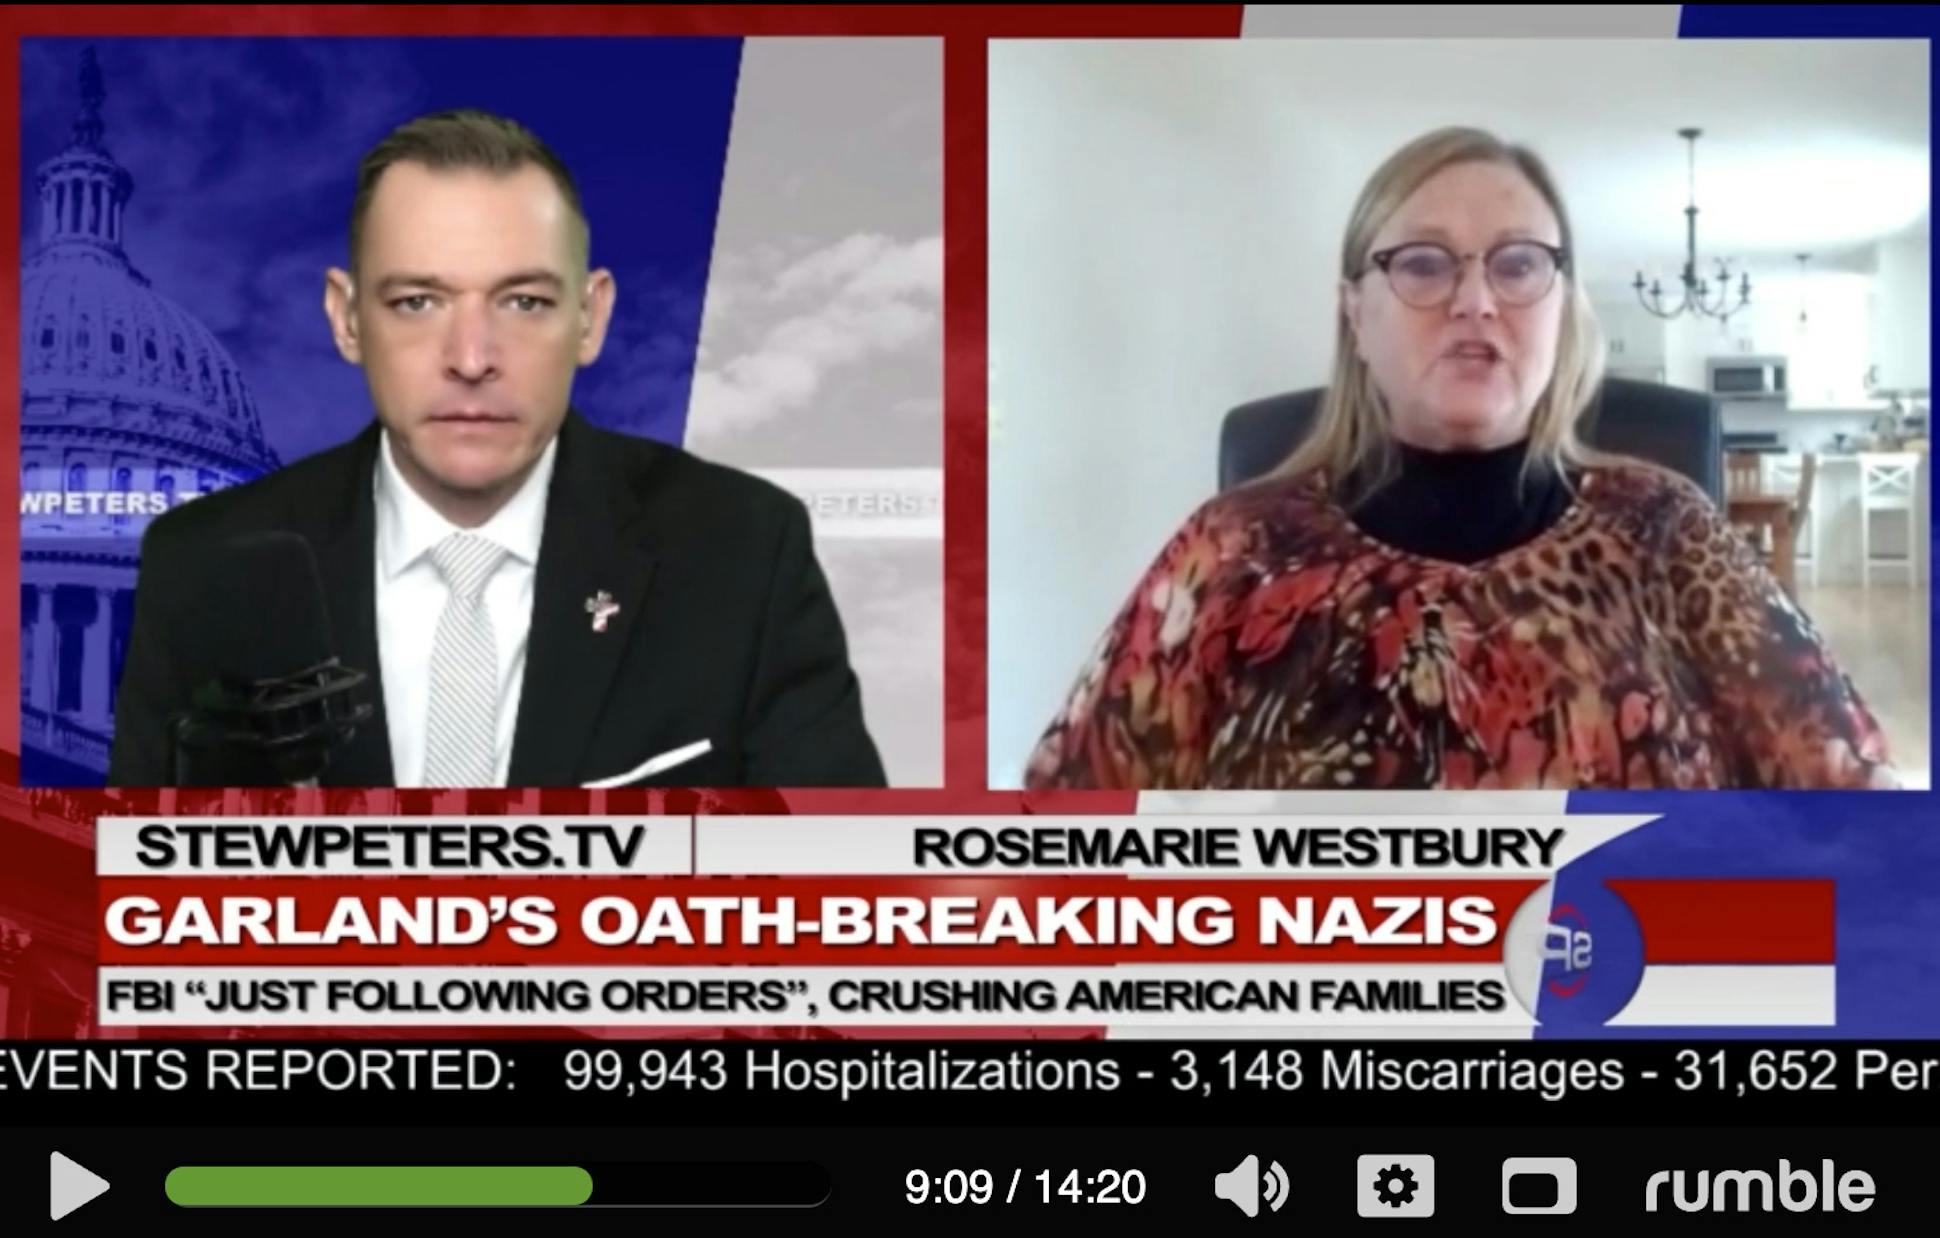 After interviews with far-right media personalities such as Stew Peters, Rosemarie Westbury's crowd-funding page saw surges in donations. She has described the U.S. government as a “domestic threat.”